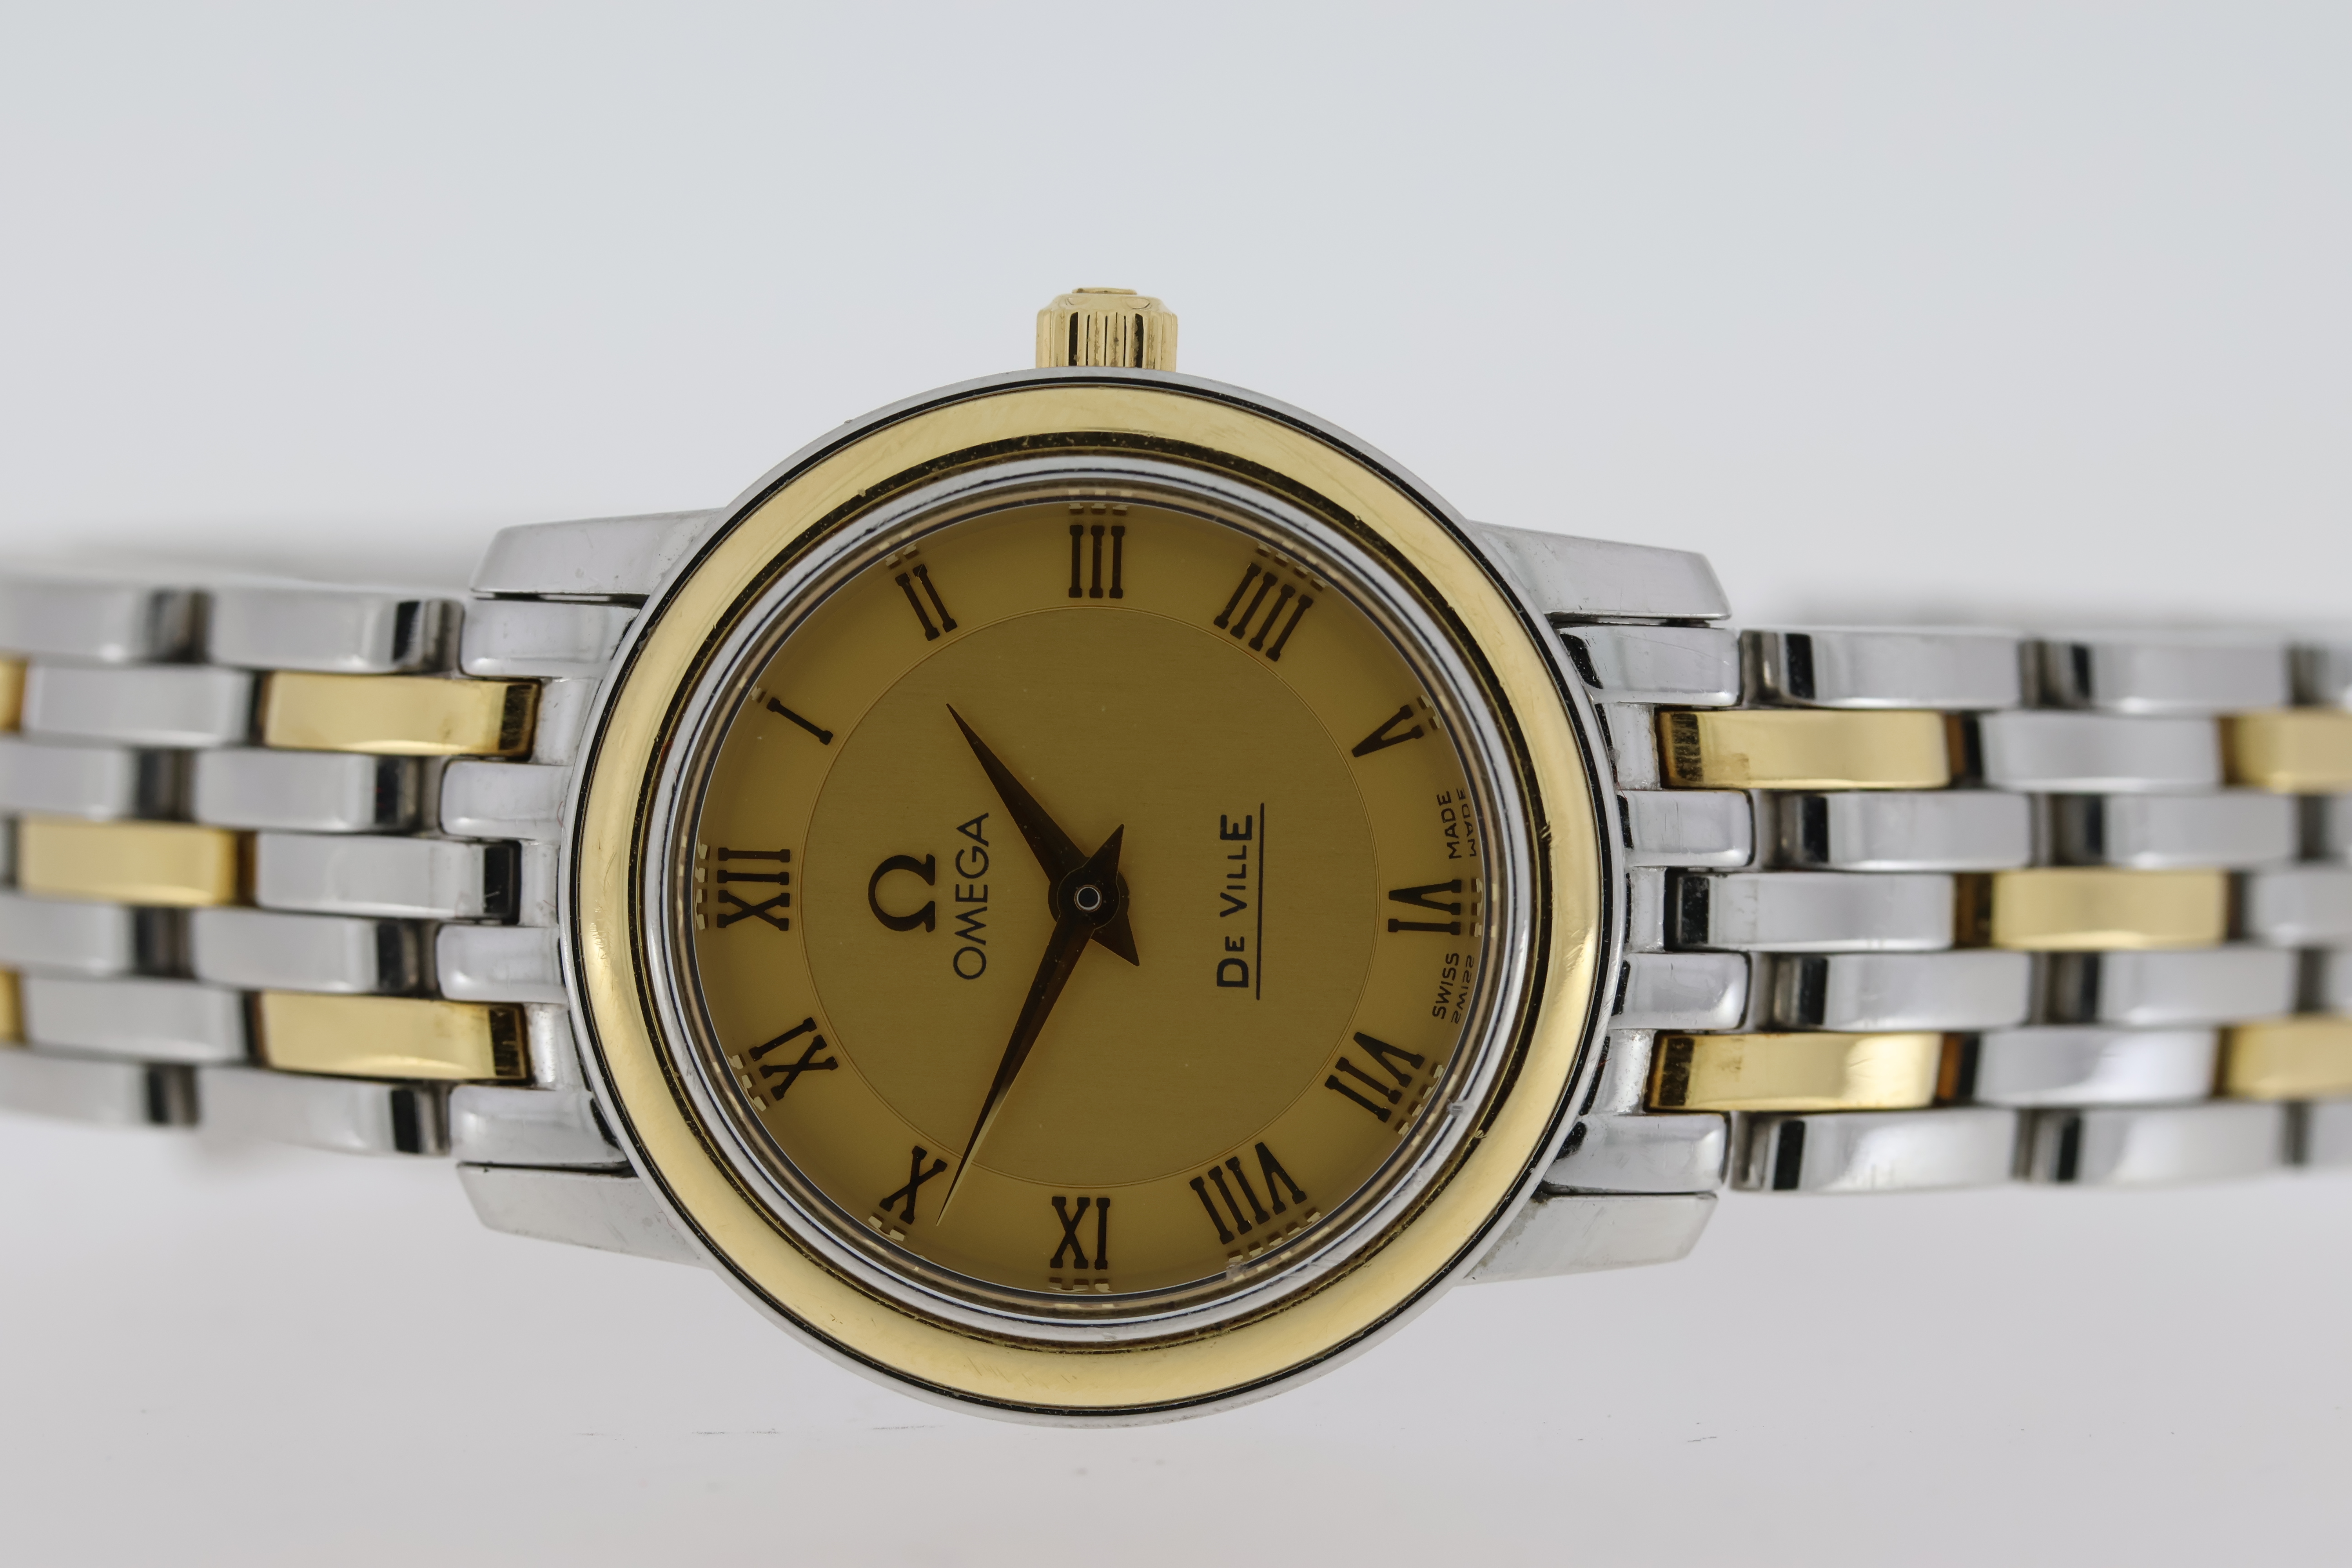 LADIES OMEGA DE VILLE PRESTIGE REFERENCE 43701200 CIRCA 2011 WITH BOX AND PAPERS - Image 6 of 9